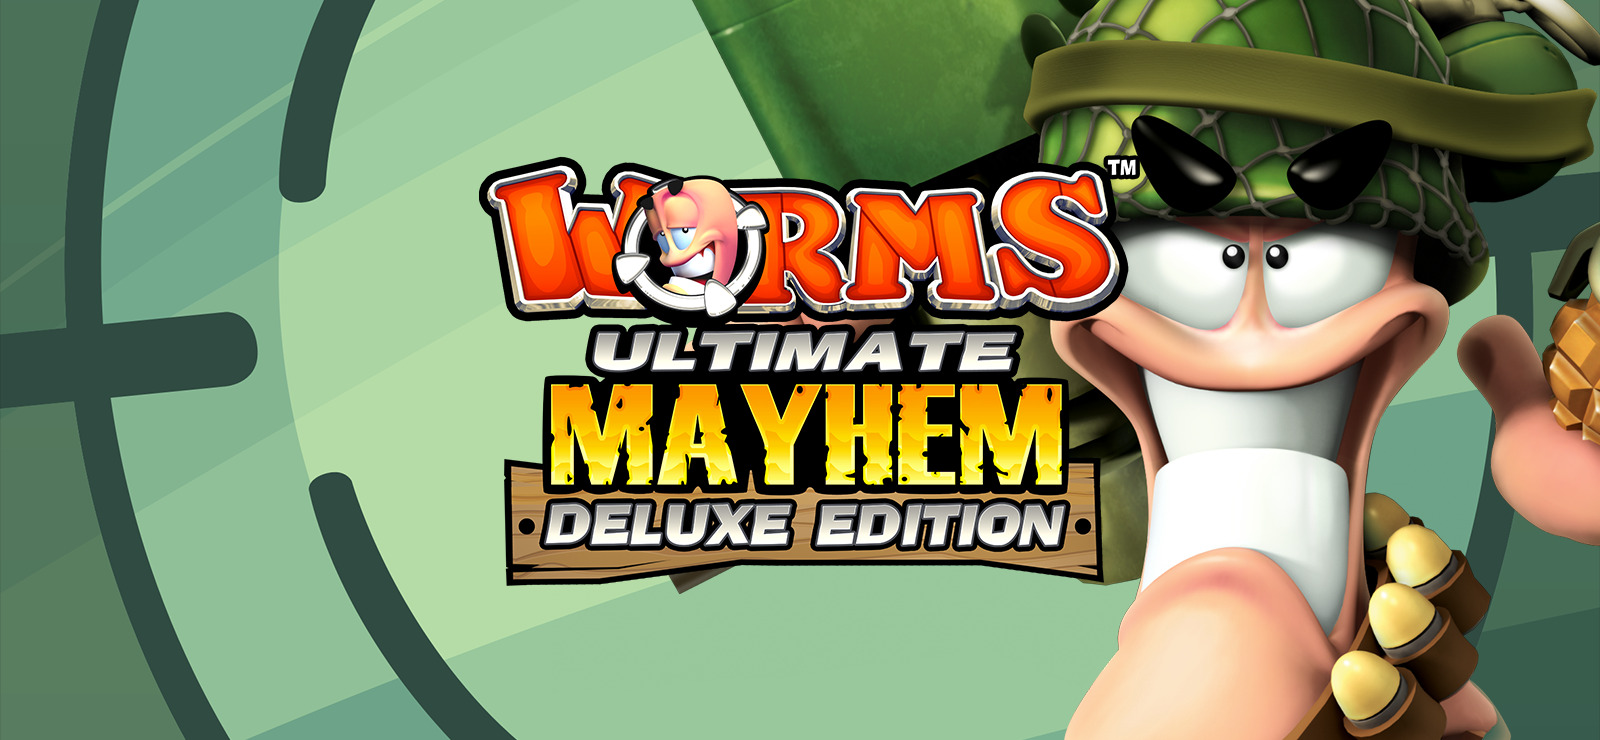 Steam worms ultimate фото 2